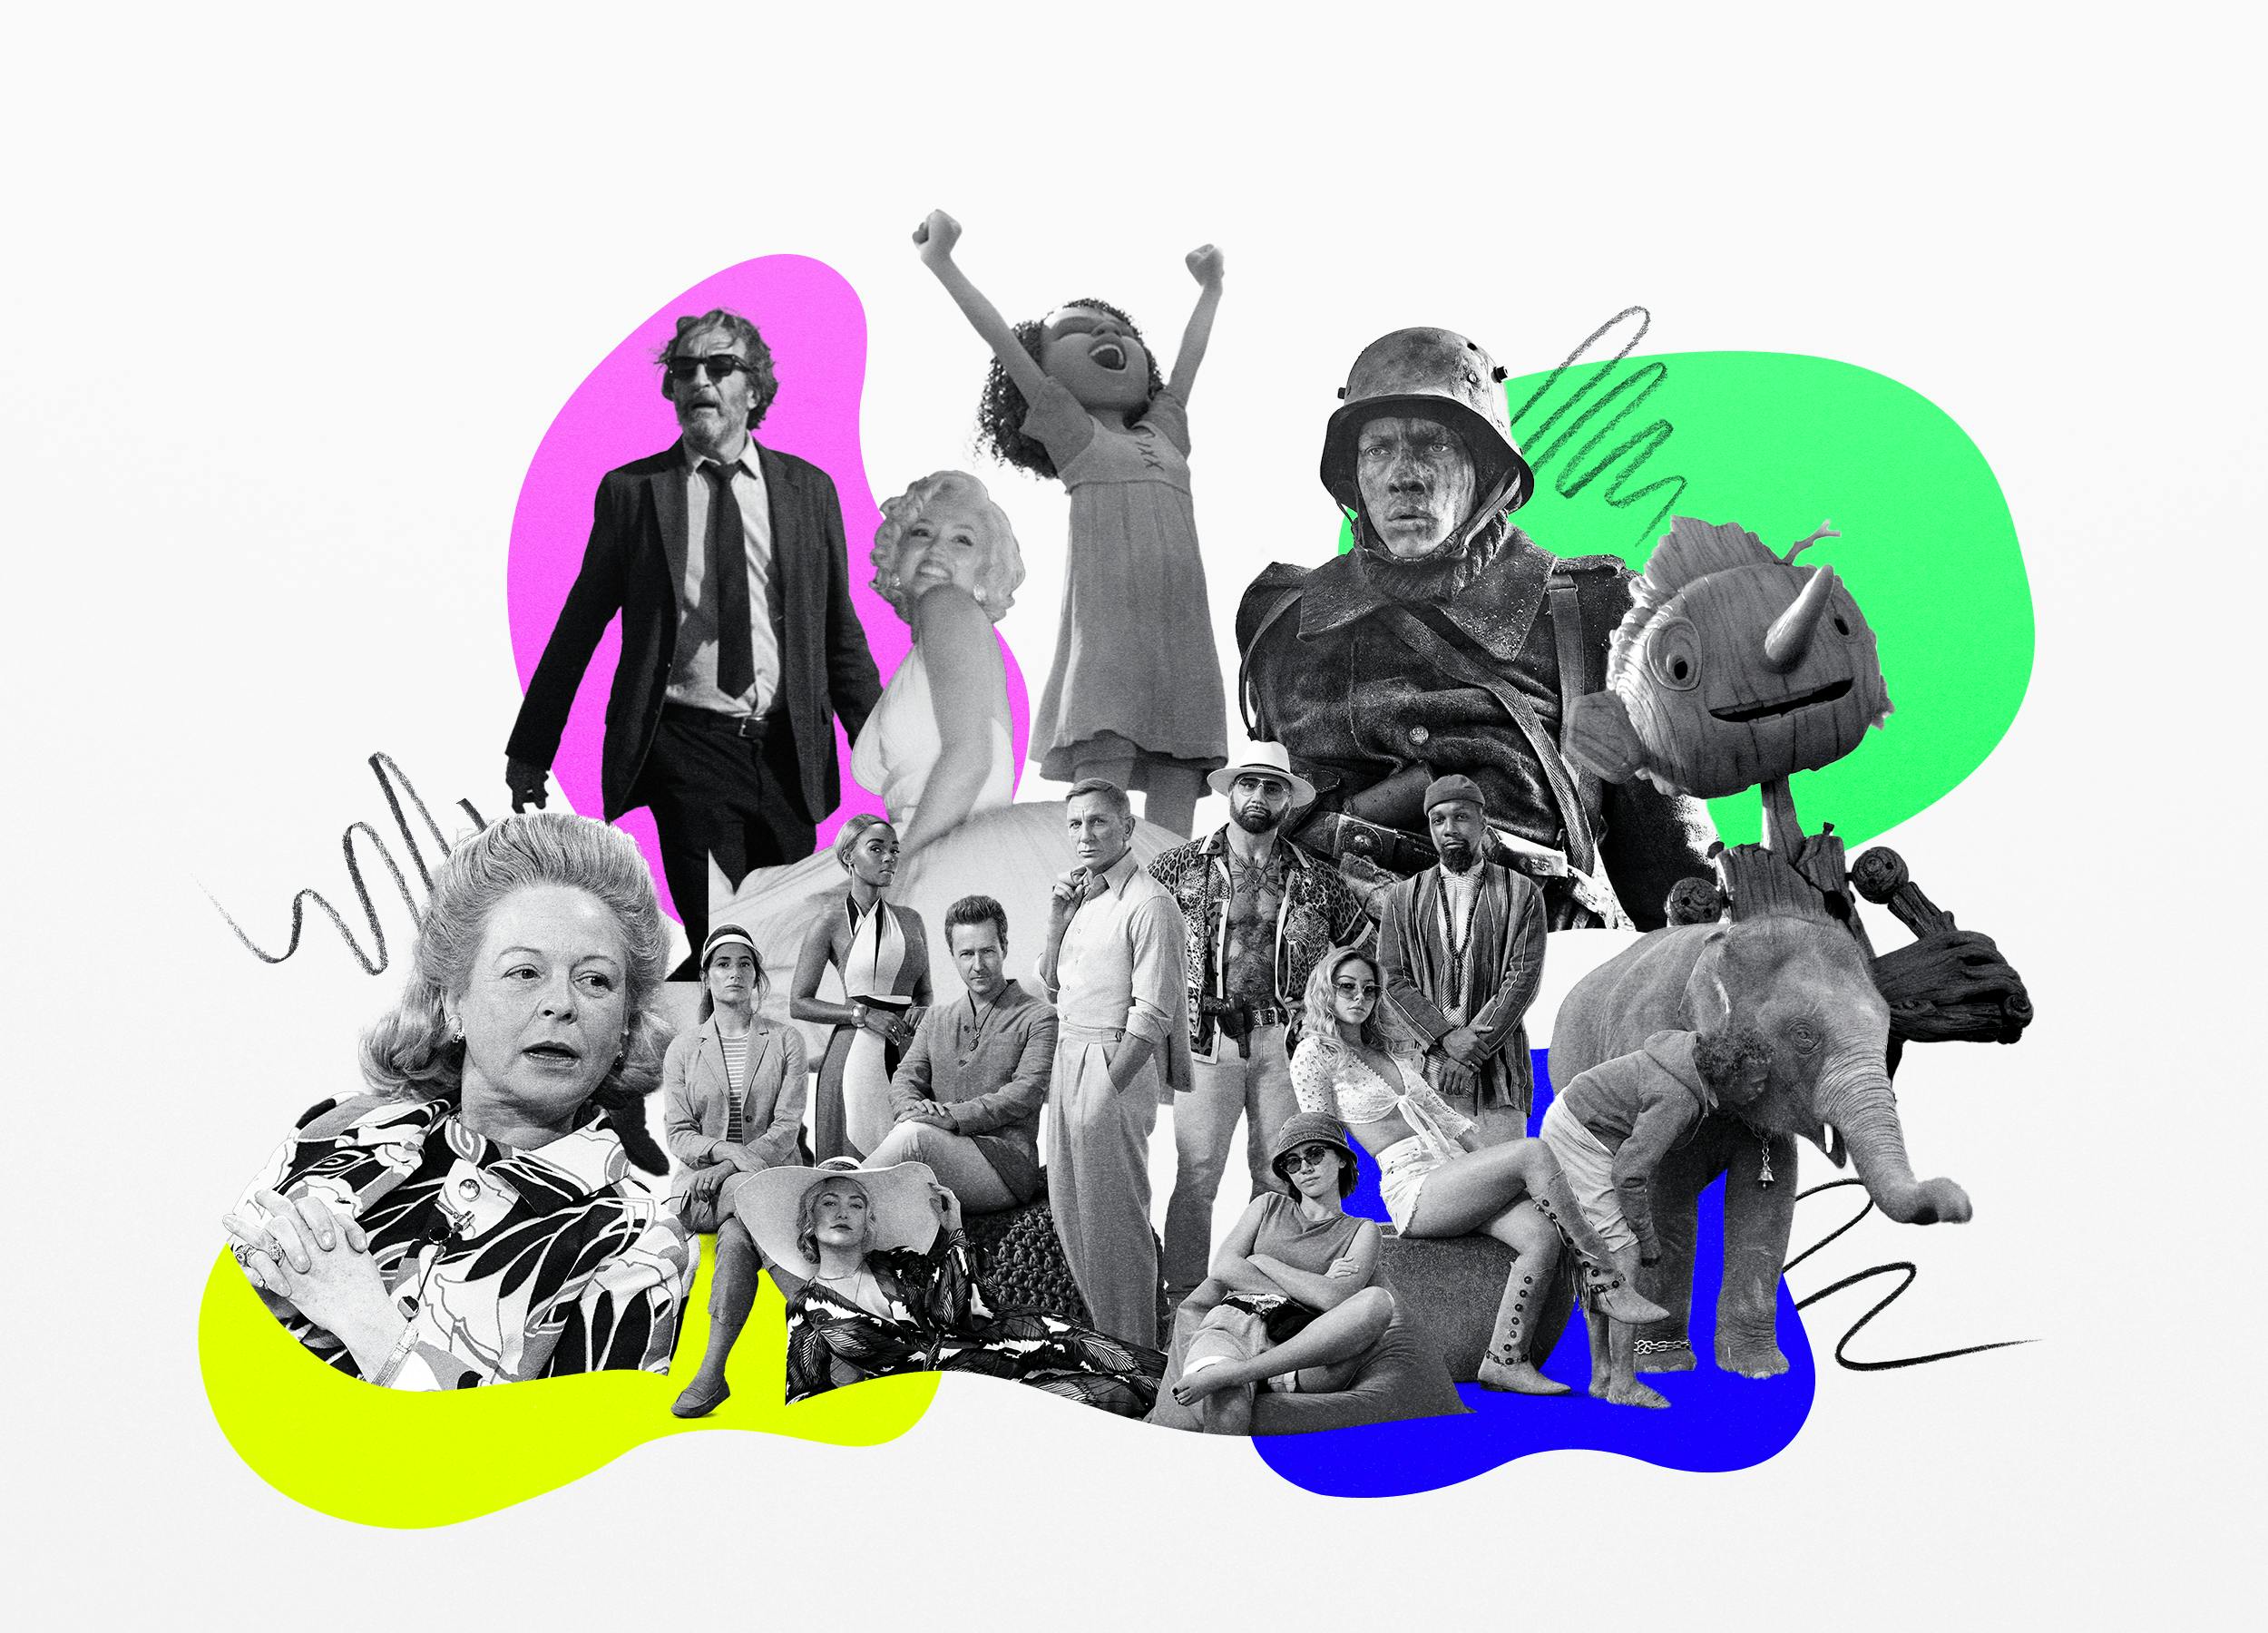 A graphic of Netflix's Oscar nominated titles including The Martha Mitchell Effect, BARDO, Glass Onion: A Knives Out Mystery, Blonde, The Sea Beast, Guillermo del Toro's Pinocchio, The Elephant Whisperers, and All Quiet on the Western Front. Behind them are blobs of color in yellow, blue, green, and pink.